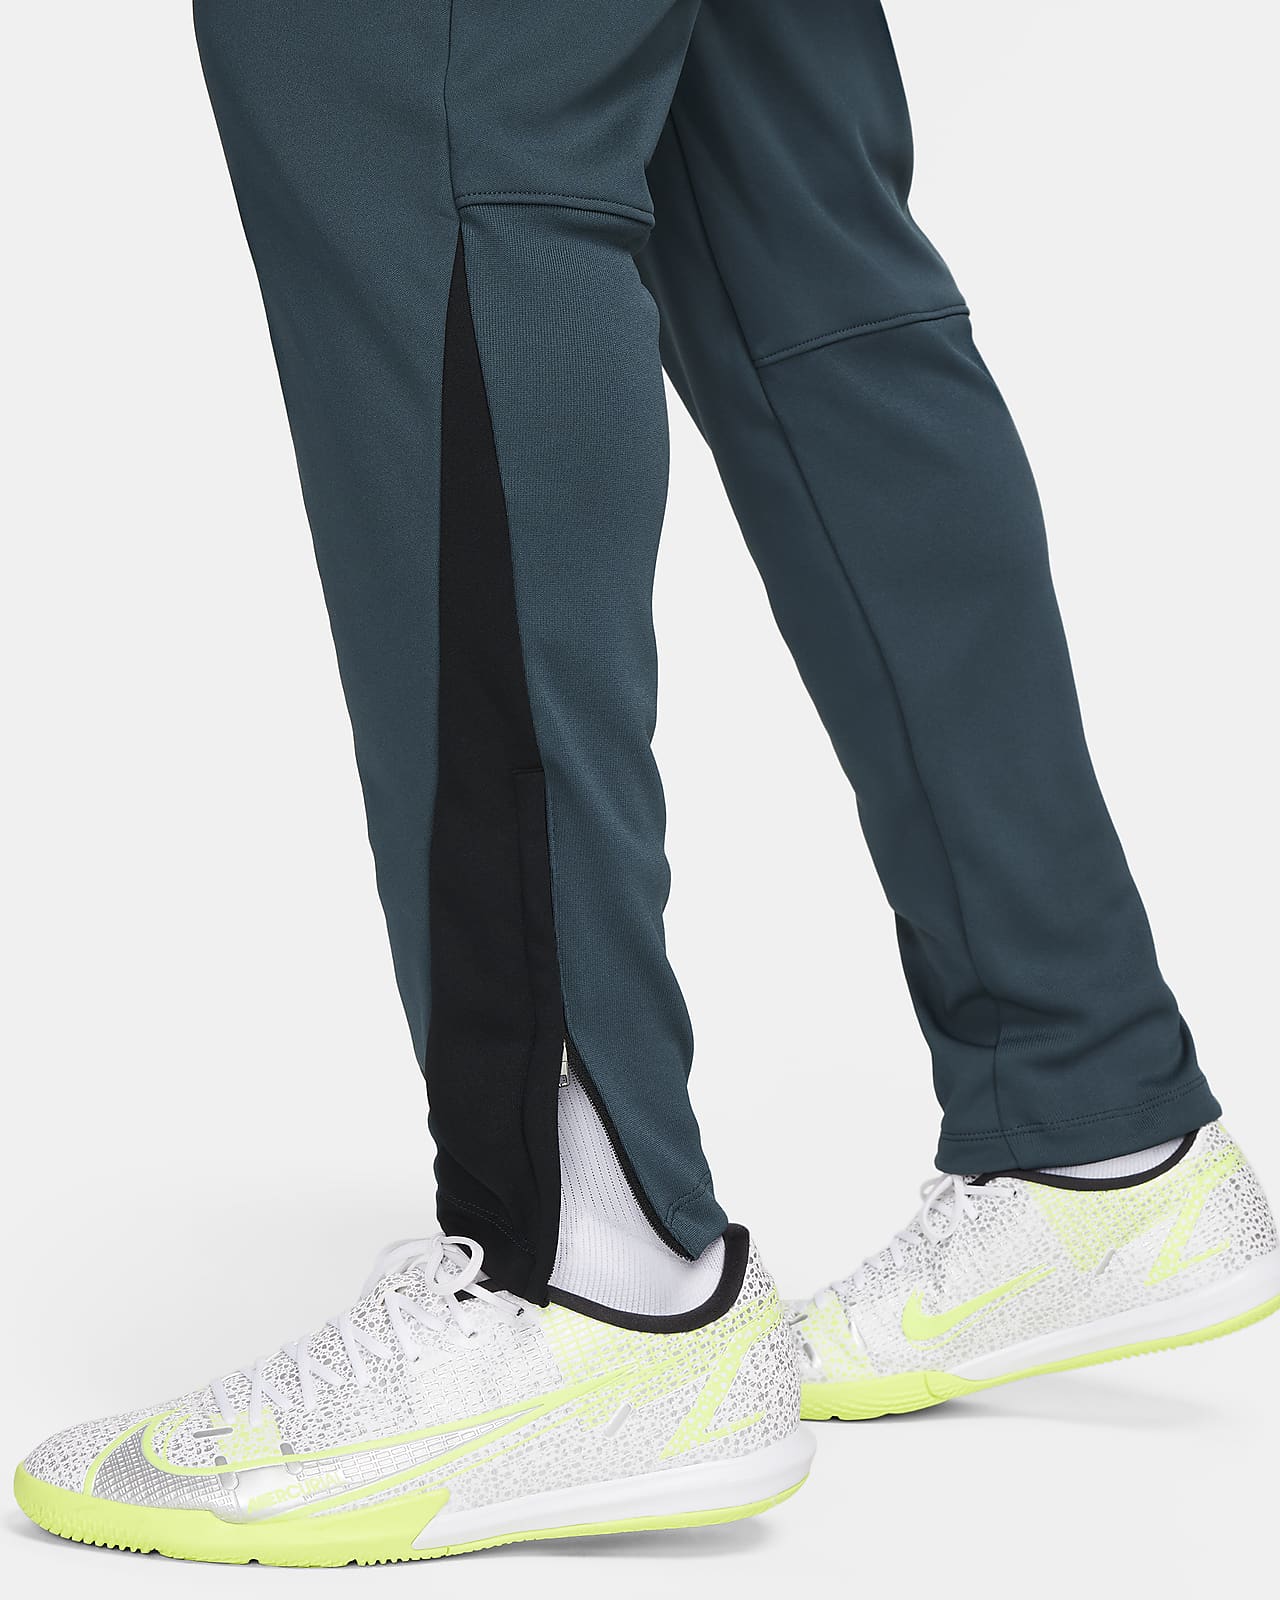 Nike Academy Winter Warrior Men's Therma-FIT Football Pants. Nike CH